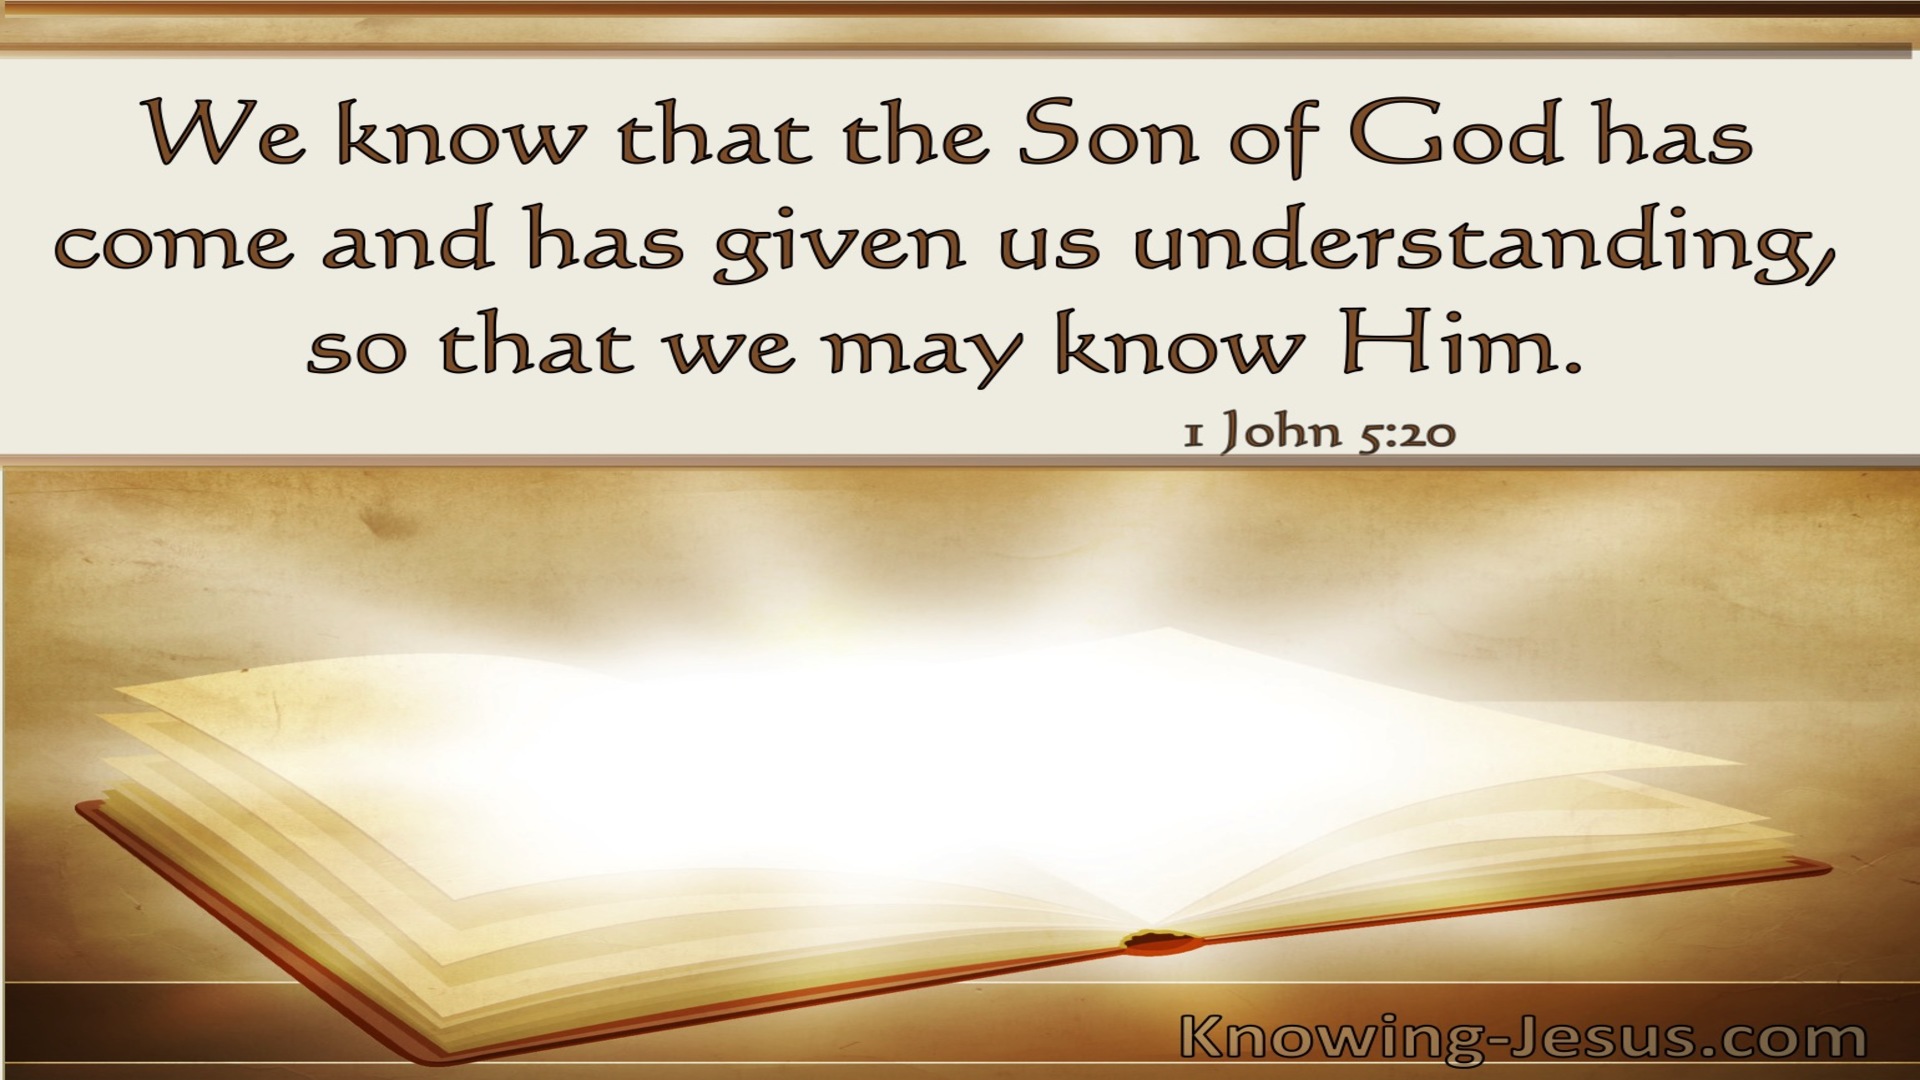 1 John 5:20 He Has Come And Given Us Understanding (windows)04:25